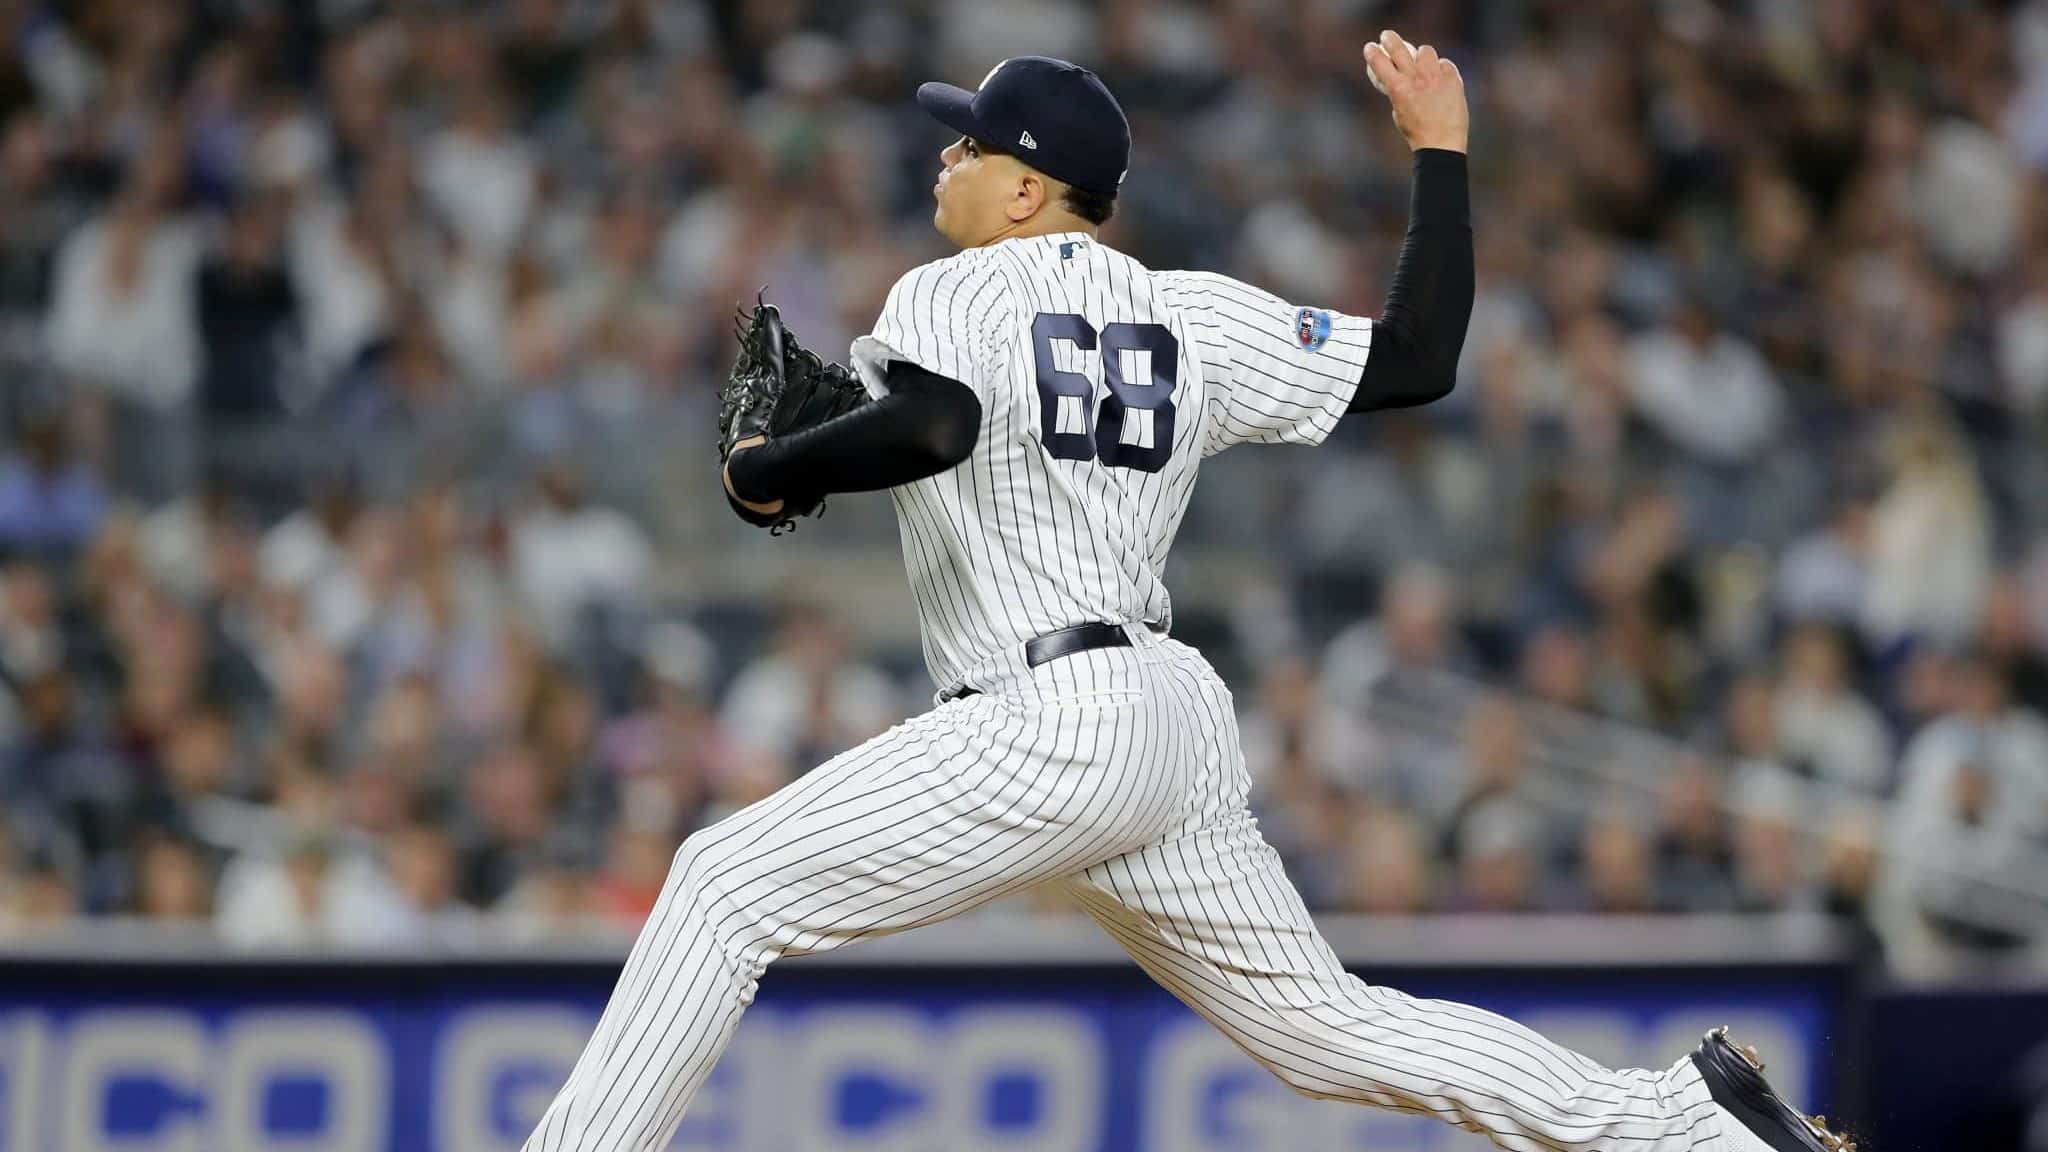 NEW YORK, NEW YORK - OCTOBER 03: Dellin Betances #68 of the New York Yankees throws a pitch against the Oakland Athletics during the fifth inning in the American League Wild Card Game at Yankee Stadium on October 03, 2018 in the Bronx borough of New York City.